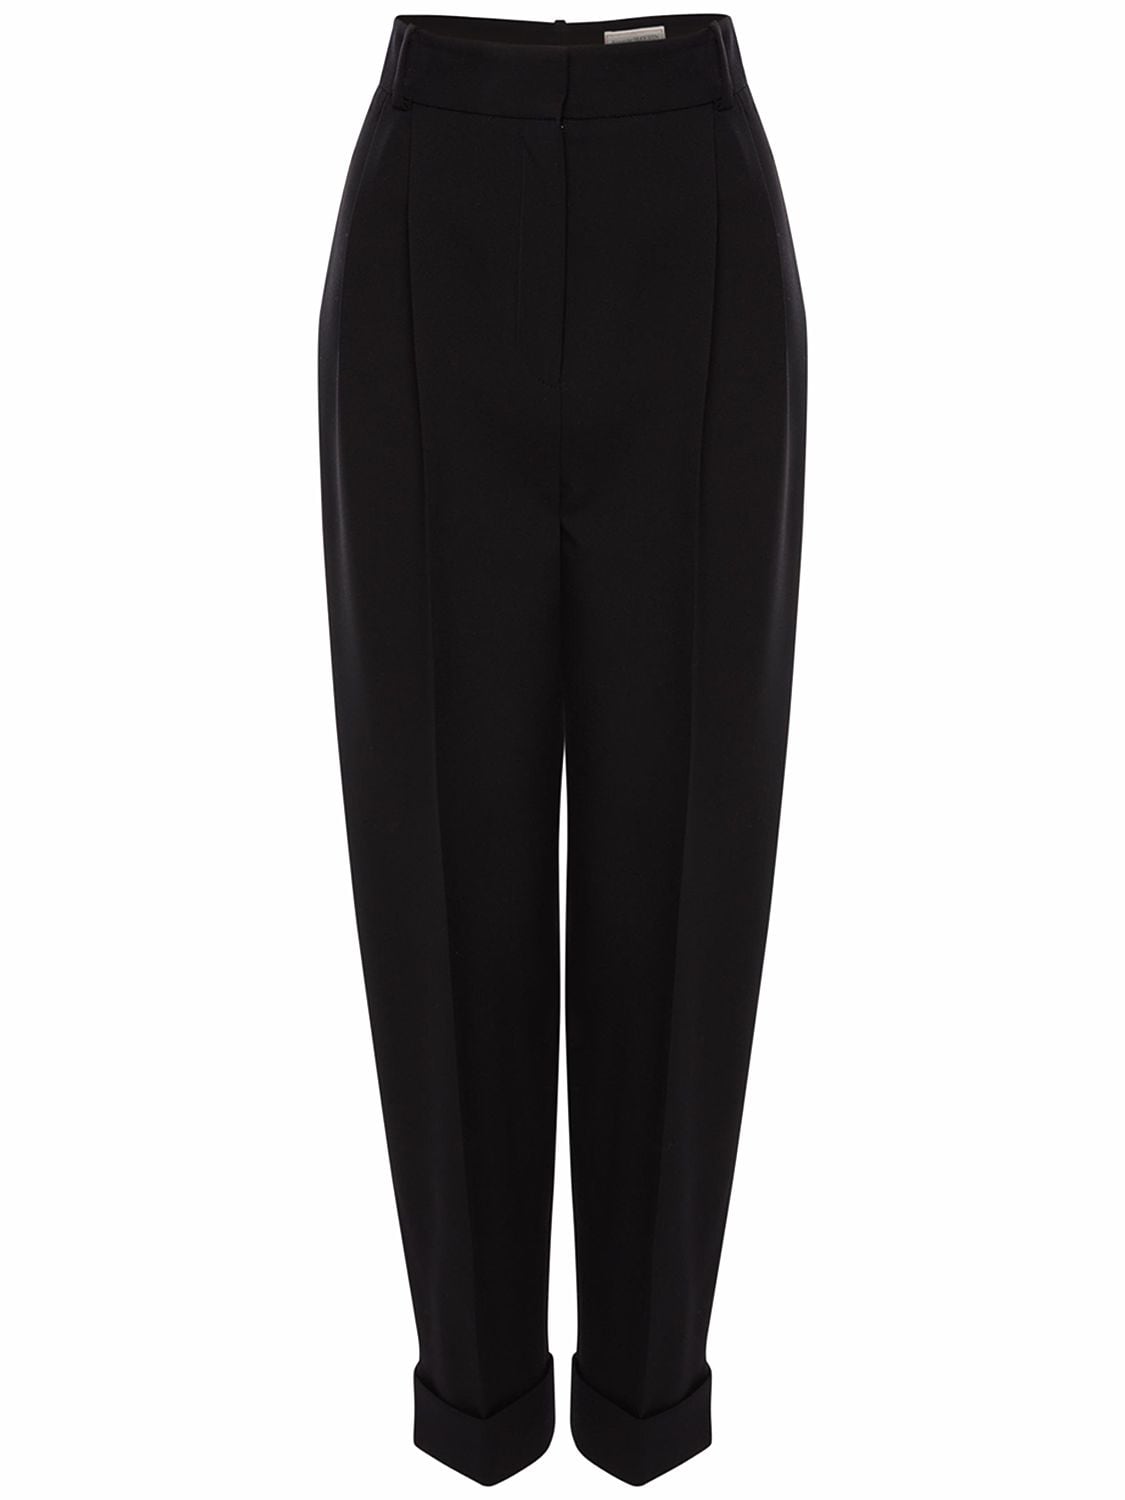 ALEXANDER MCQUEEN CROPPED TAILORED WOOL PANTS,73IA8D057-MTAWMA2